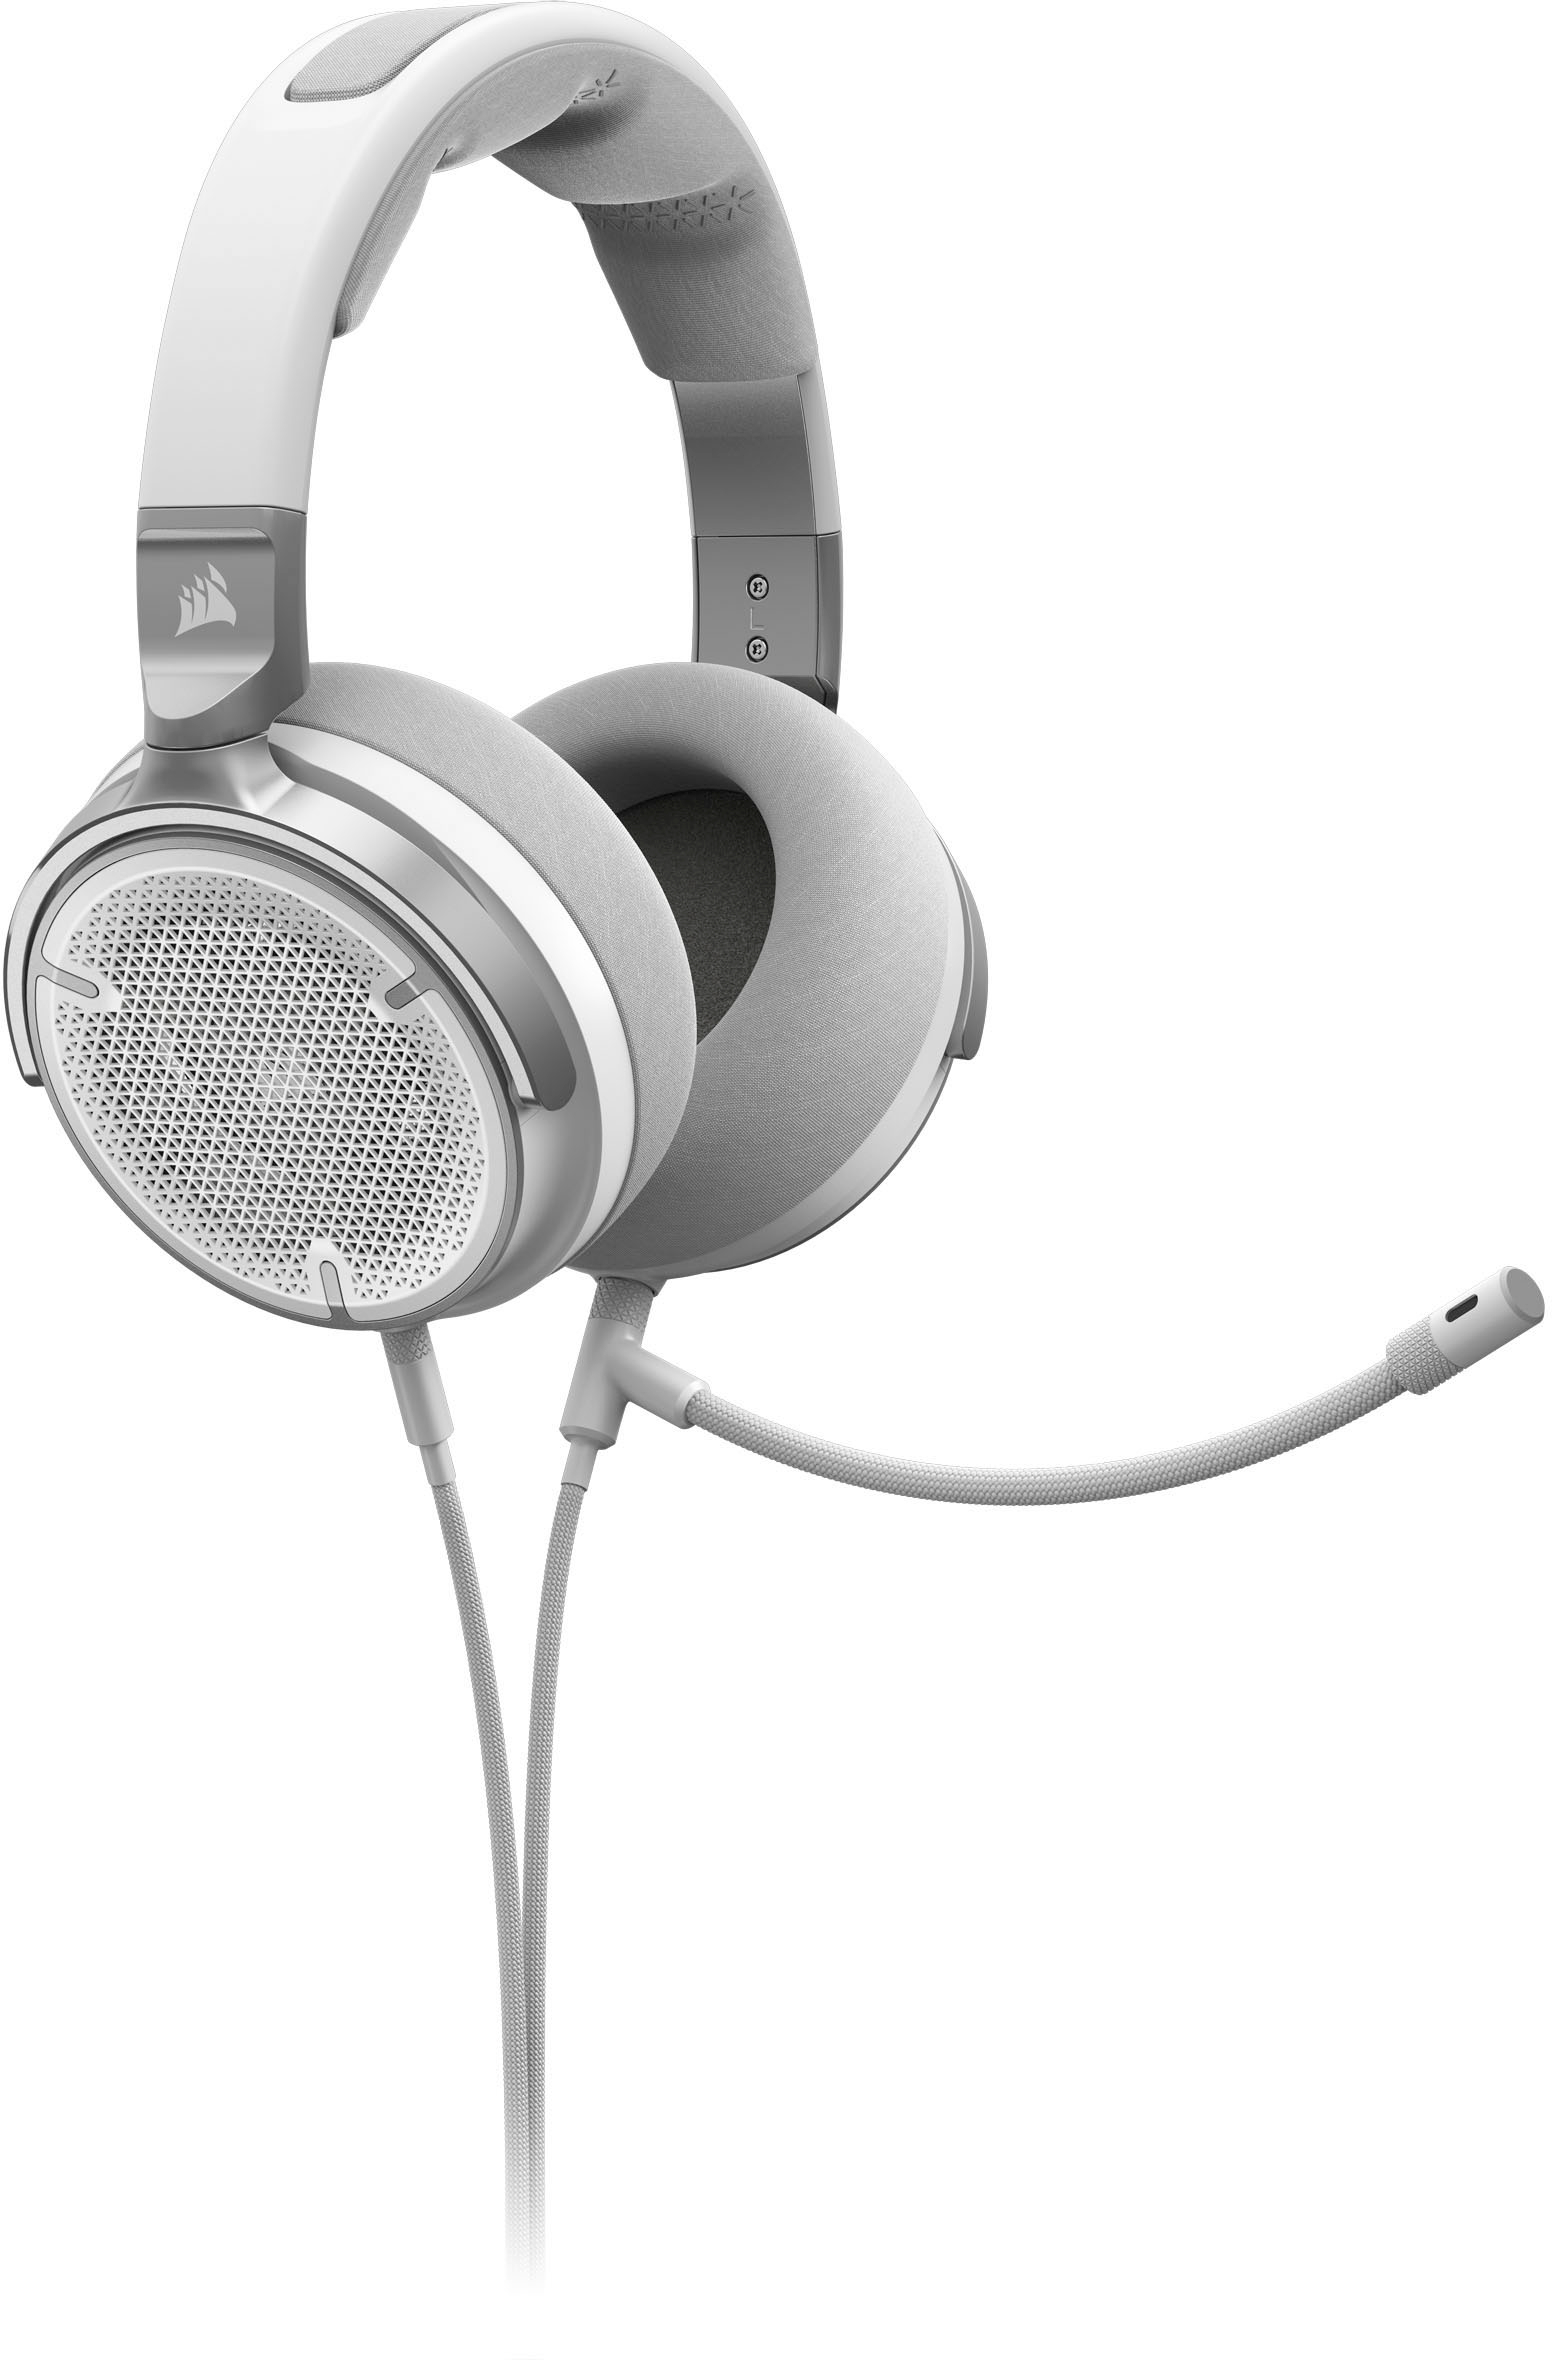 Angle View: CORSAIR - VIRTUOSO PRO Wired Open Back Streaming/Gaming Headset - White